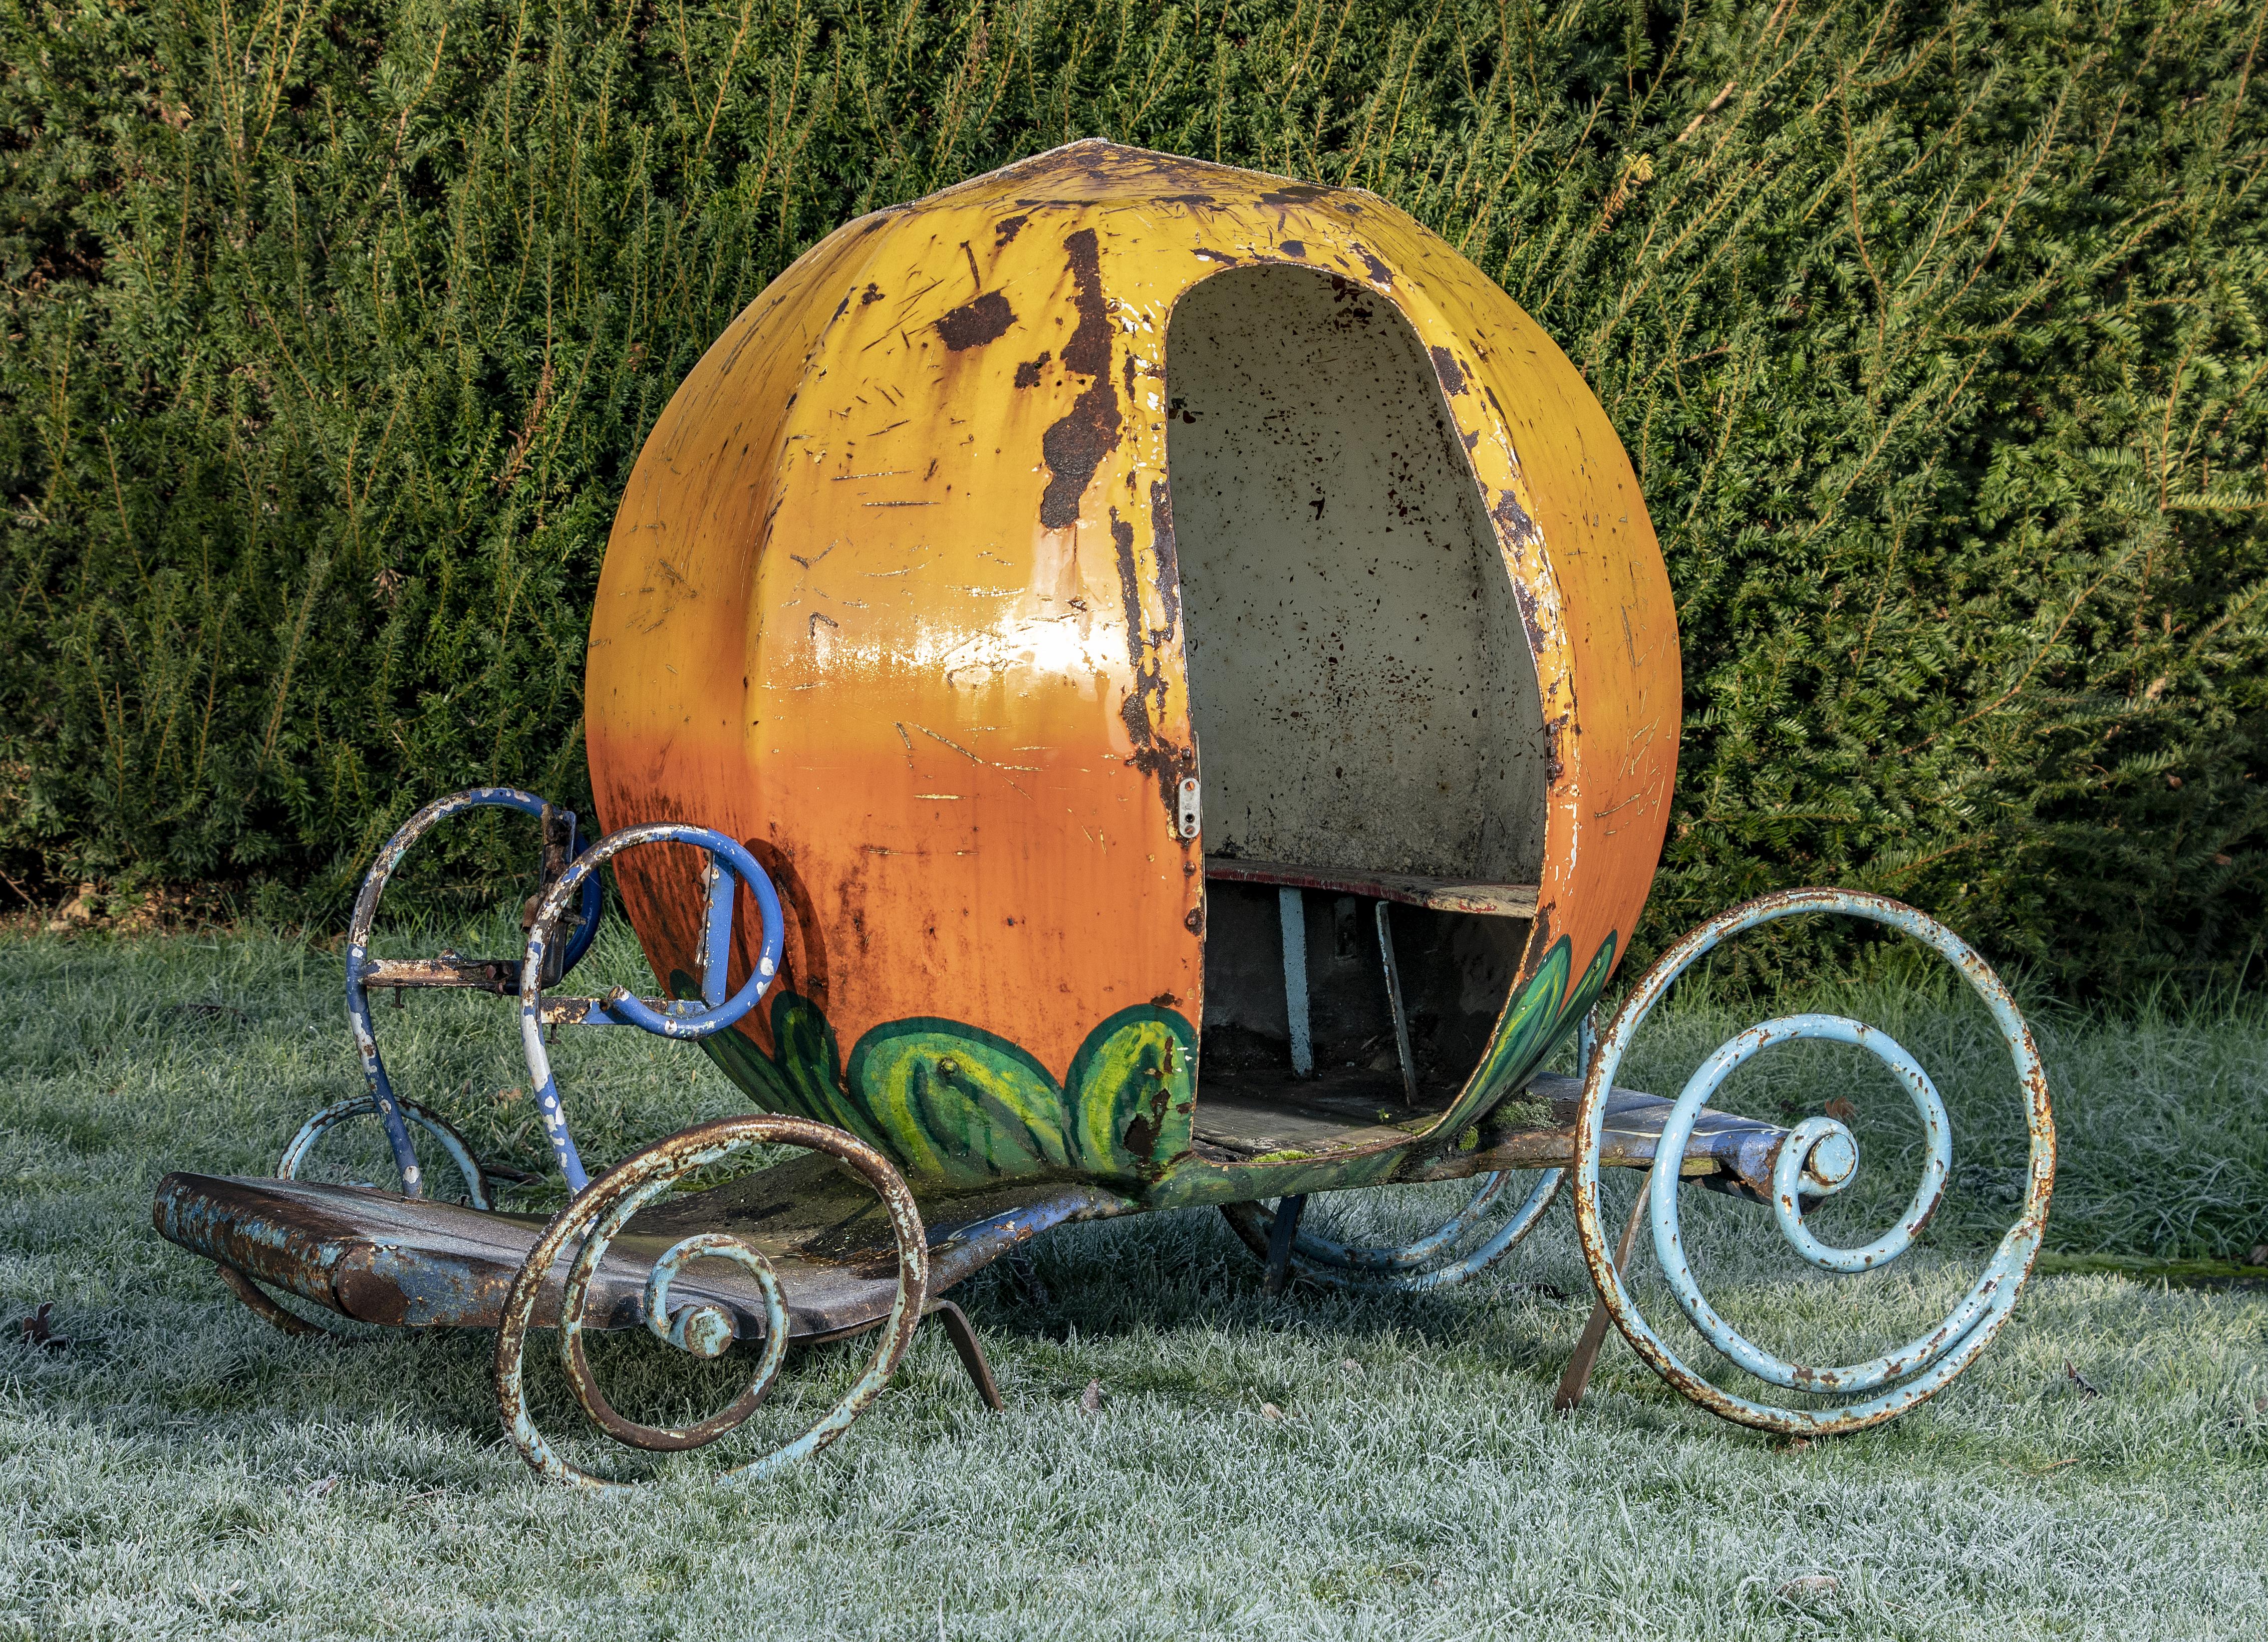 A fairground ride in a form of a Cinderella-type pumpkin carriage early 20th century painted iron 115cm high by 150cm long